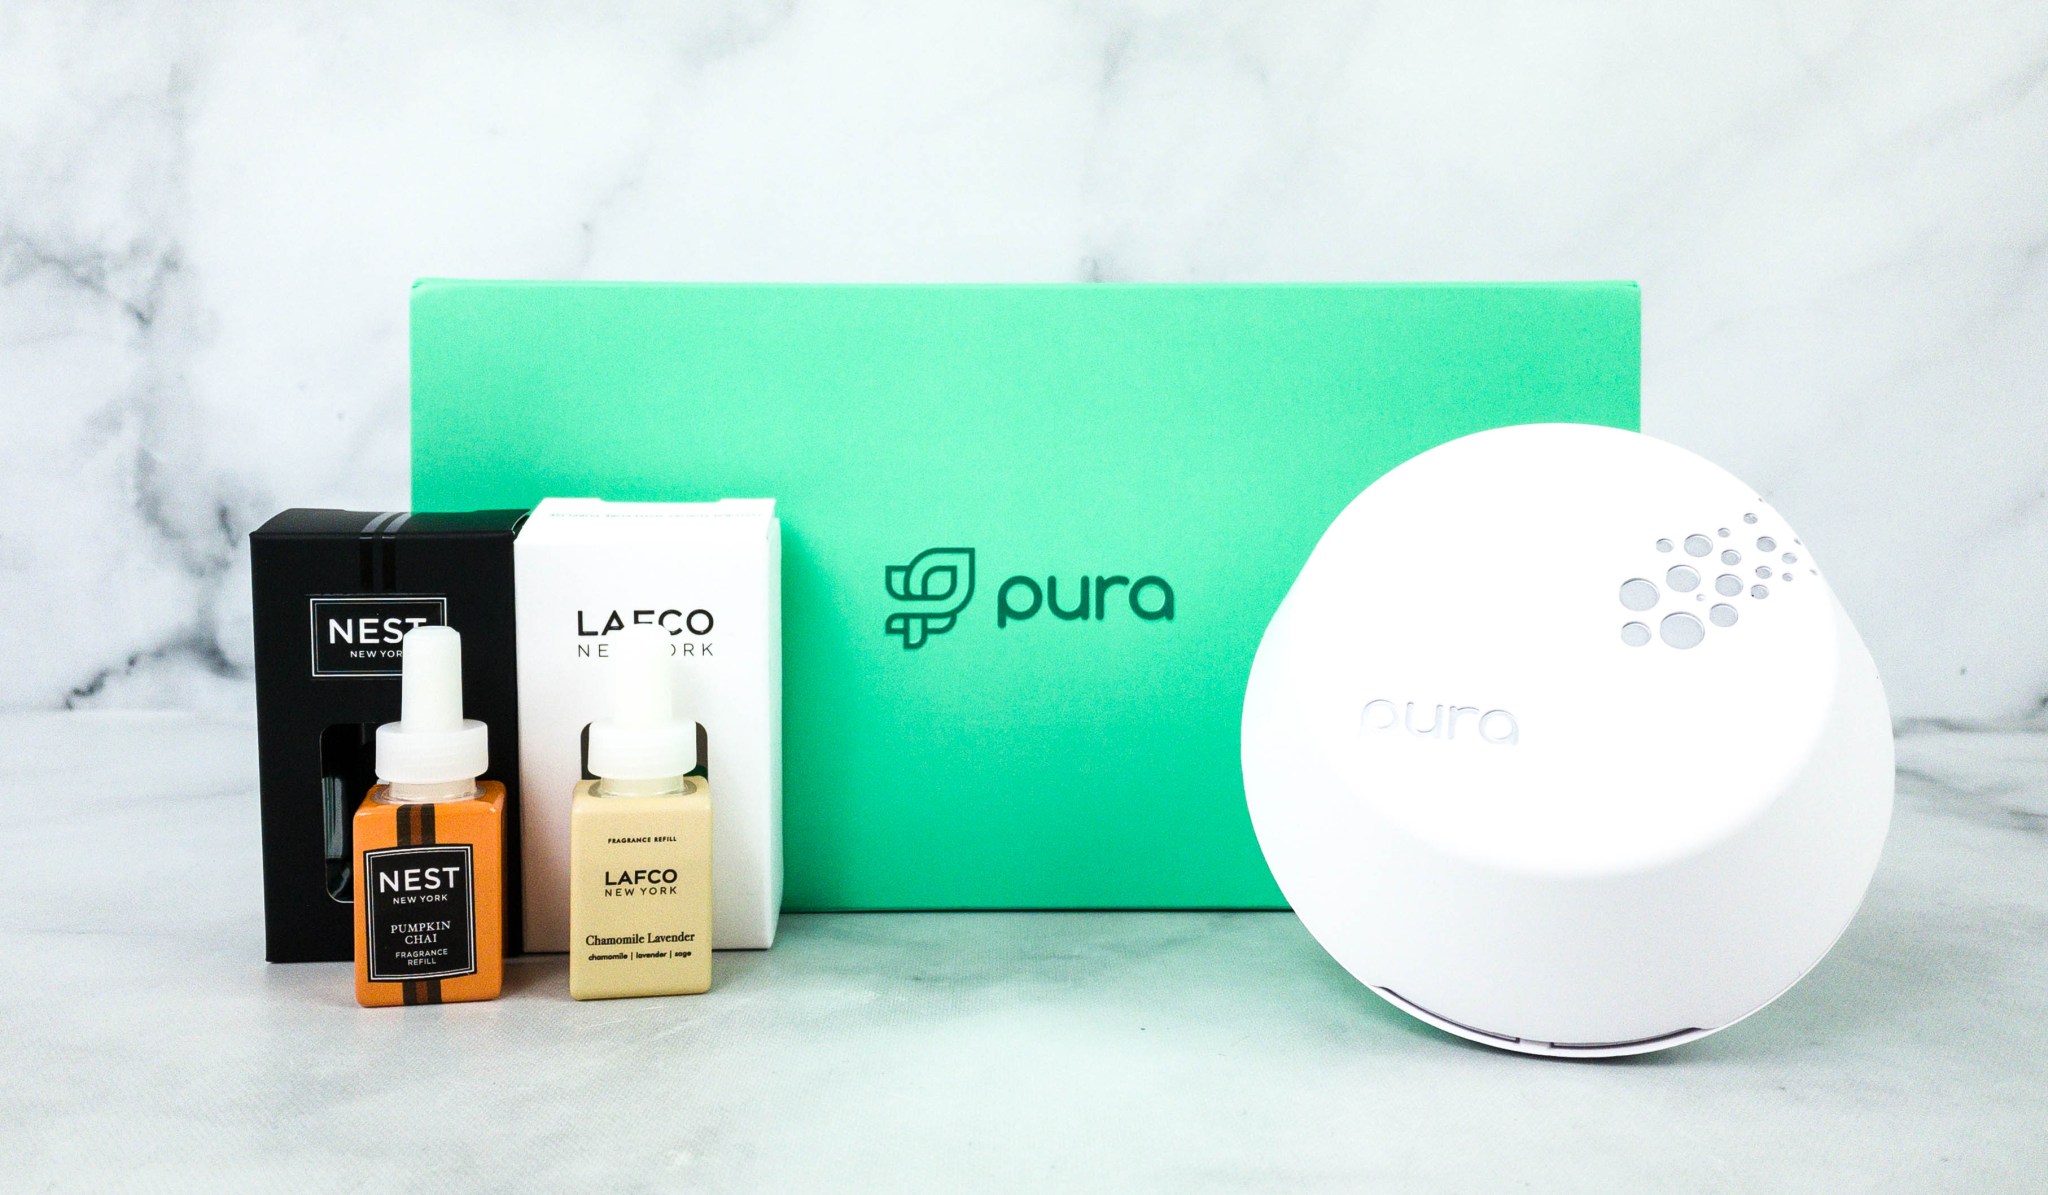 Pura Reviews Get All The Details At Hello Subscription!